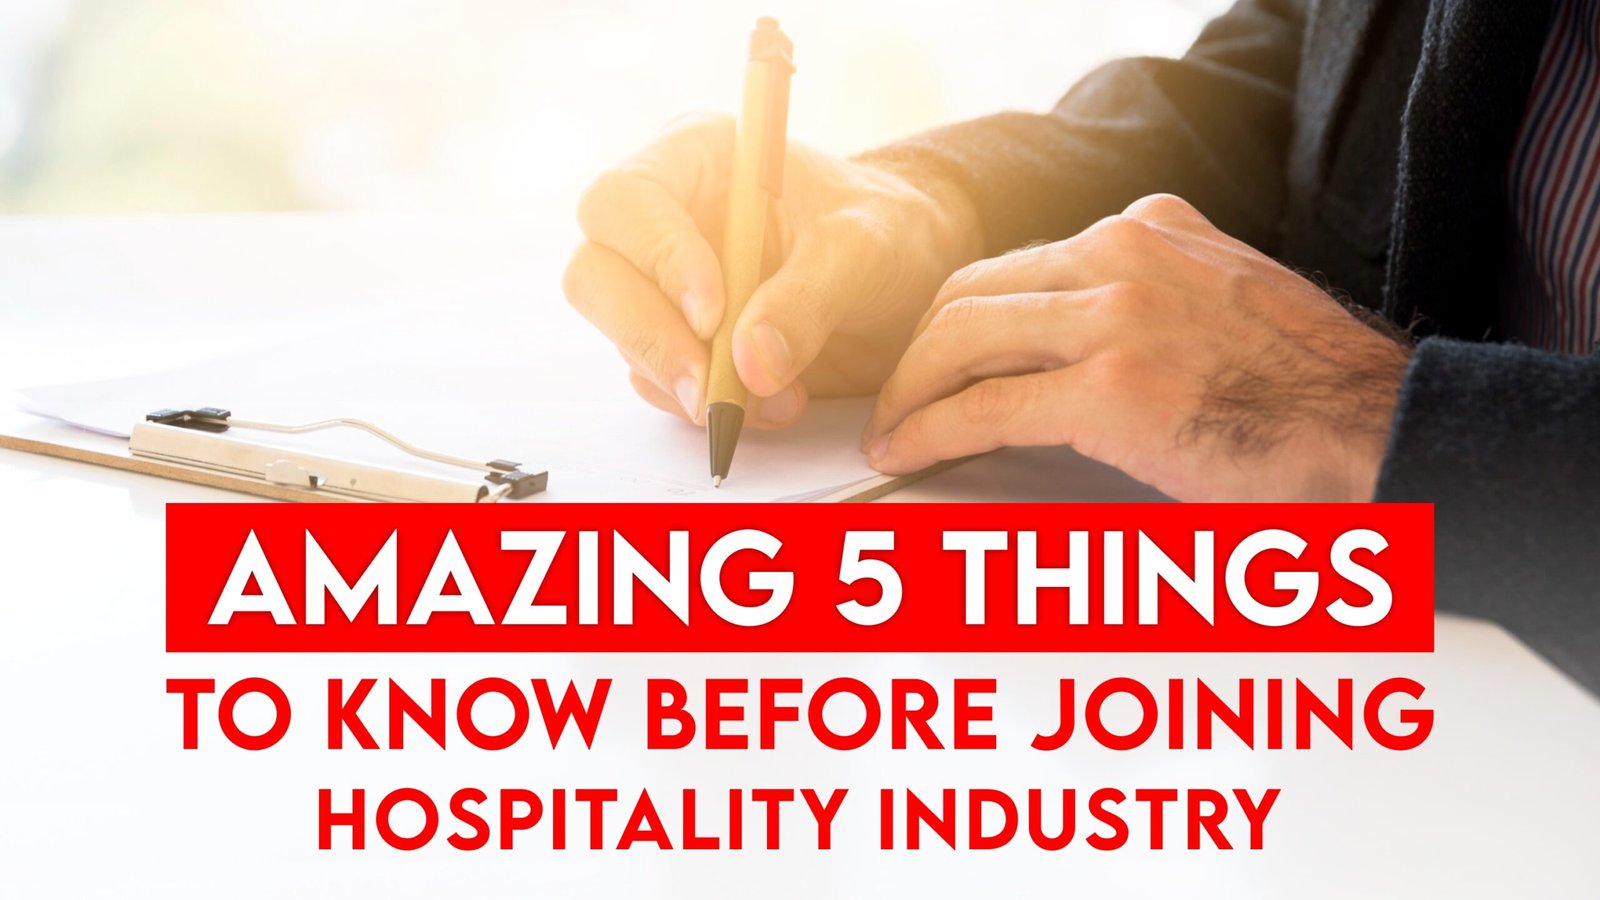 Joining hospitality industry